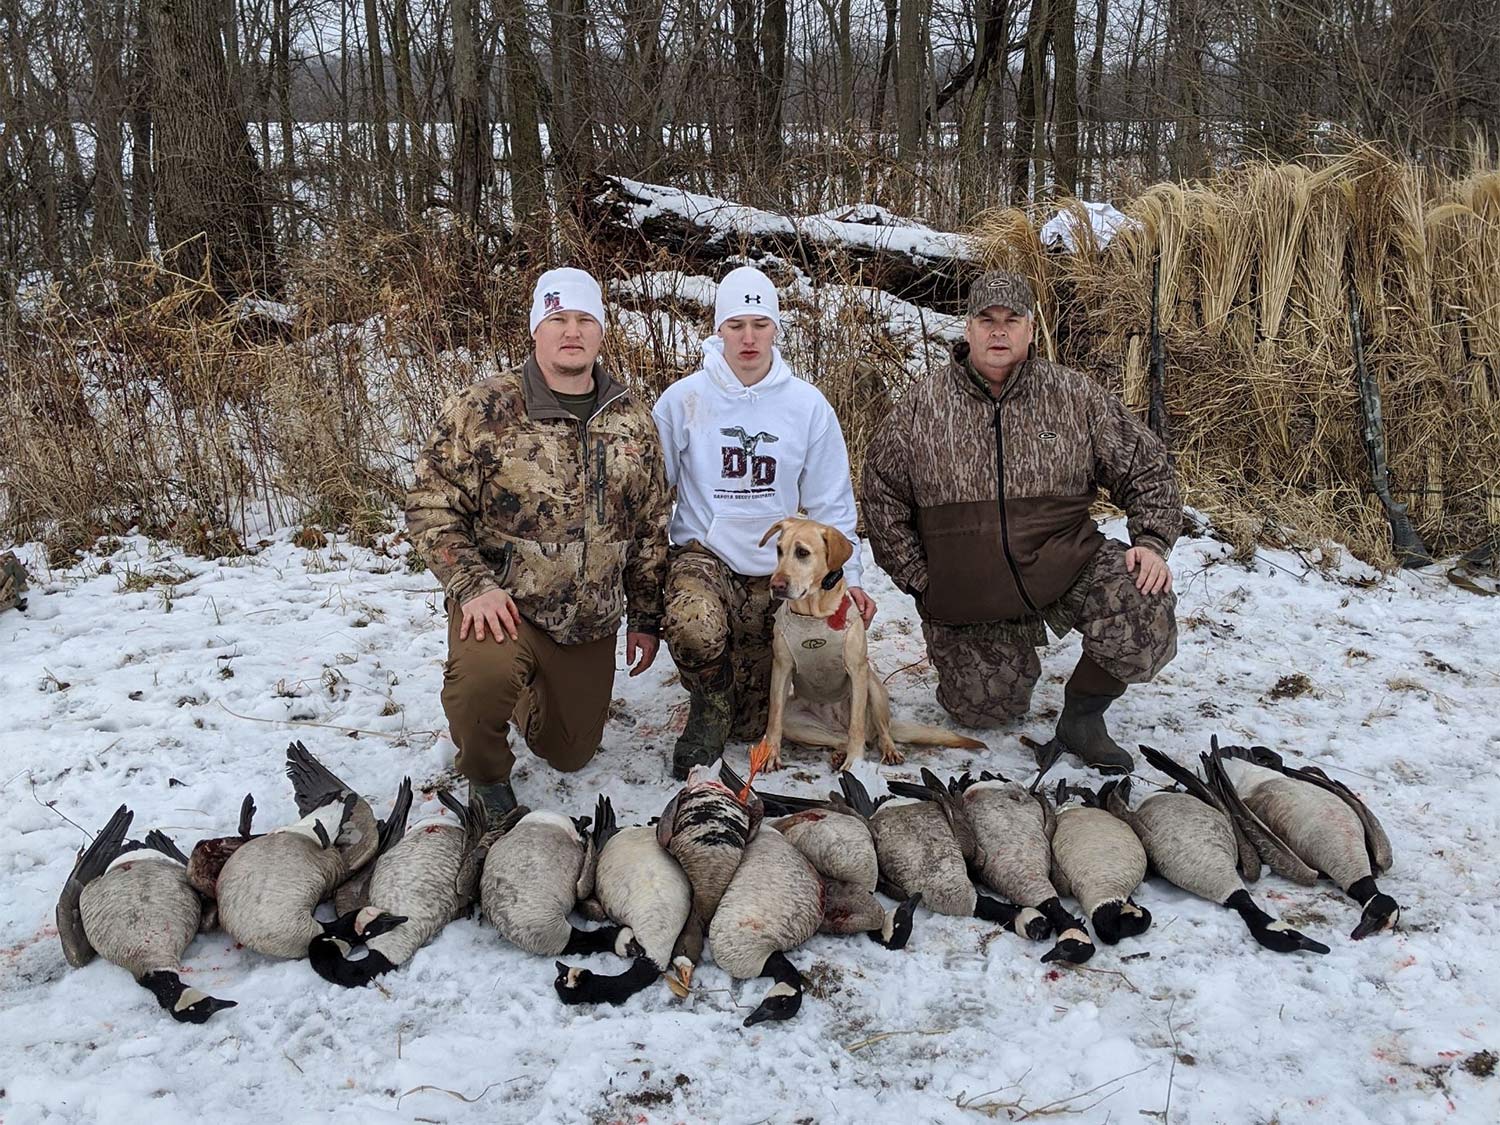 A group of hunters sit behind a line of geese on the ground.